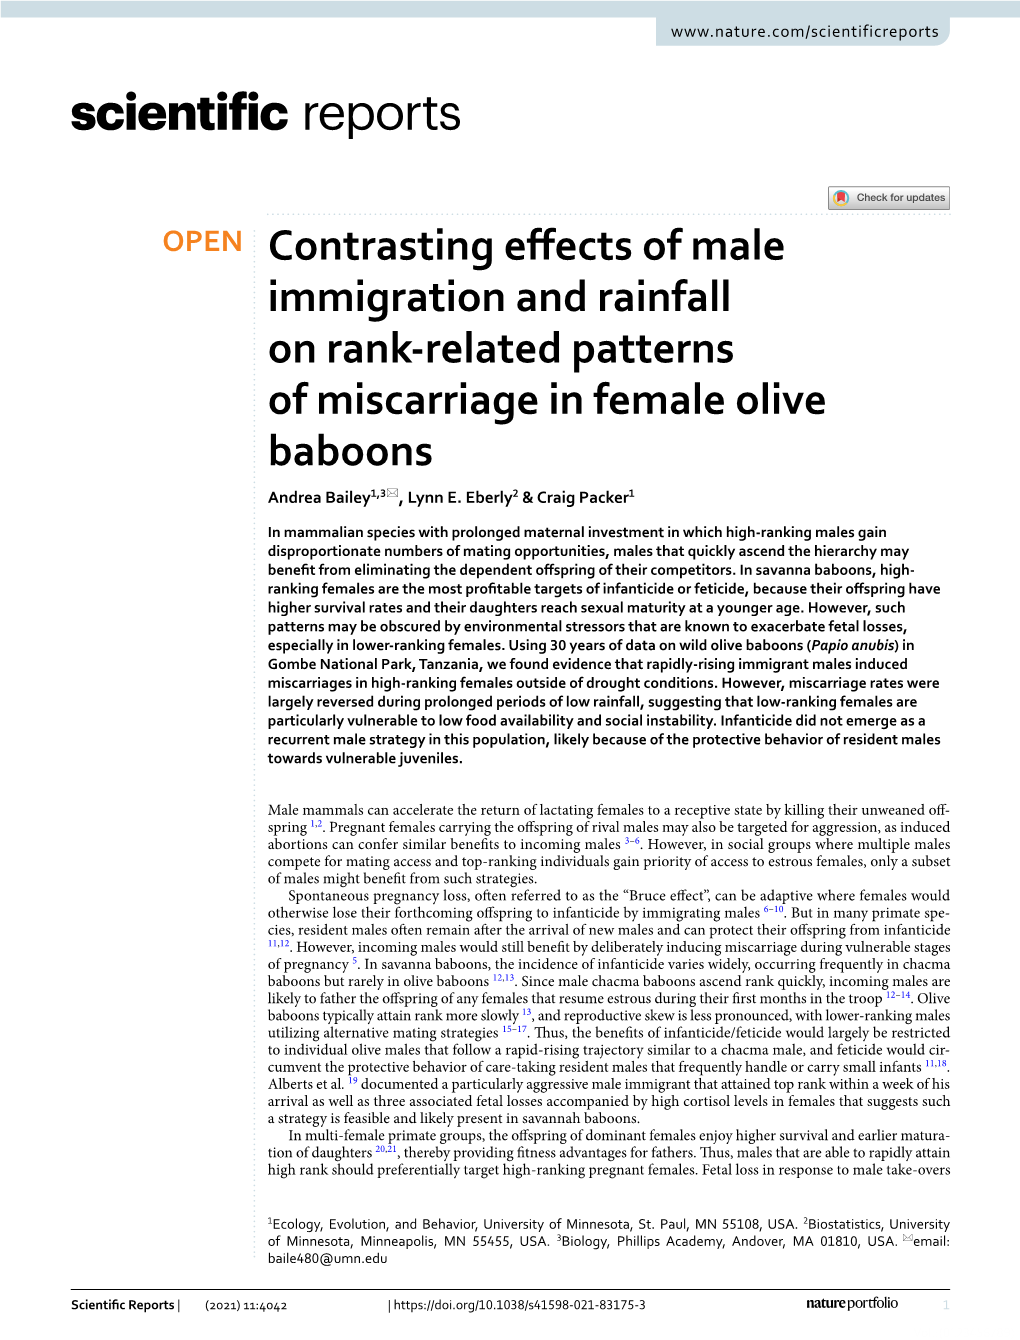 Contrasting Effects of Male Immigration and Rainfall on Rank-Related Patterns of Miscarriage in Female Olive Baboons